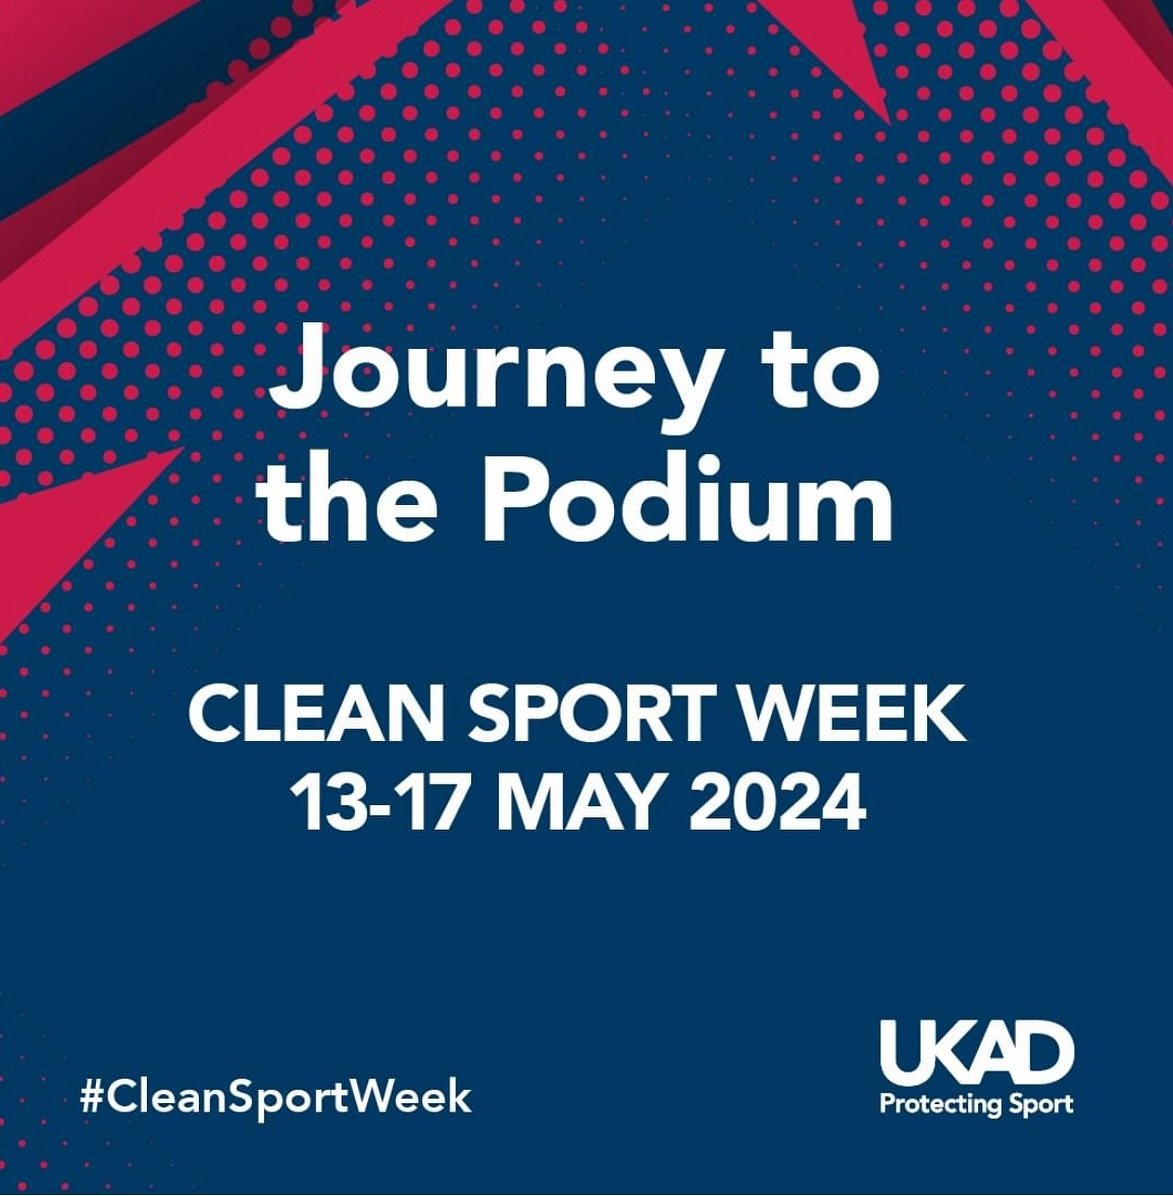 Athletes work hard to be at the very best. Creating a culture of clean sport is essential for the health of our athletes and the integrity of our sport. We&rsquo;re proud to support @ukantidoping &lsquo;s #CleanSportWeek &ldquo;Journey to the Podium&